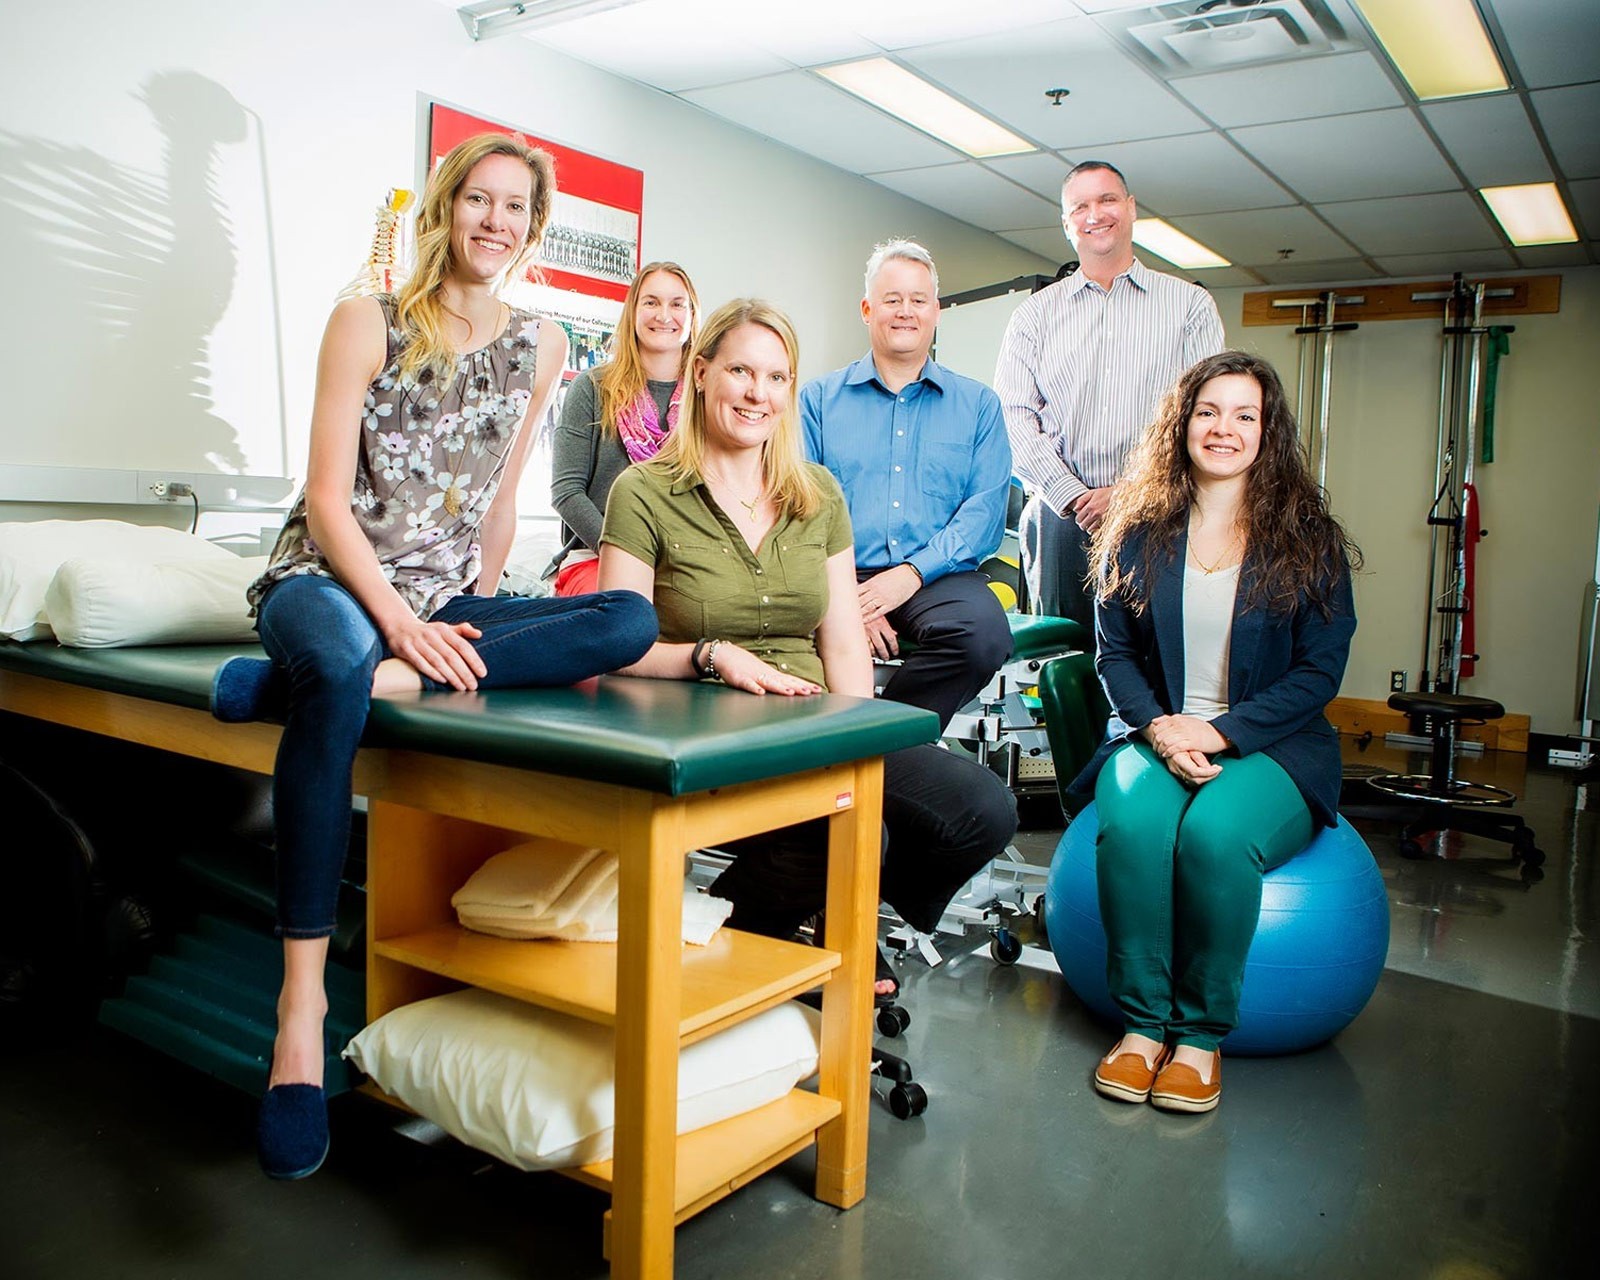 ‘It’s their time to shine:’ Athletic Therapy celebrates 30 years